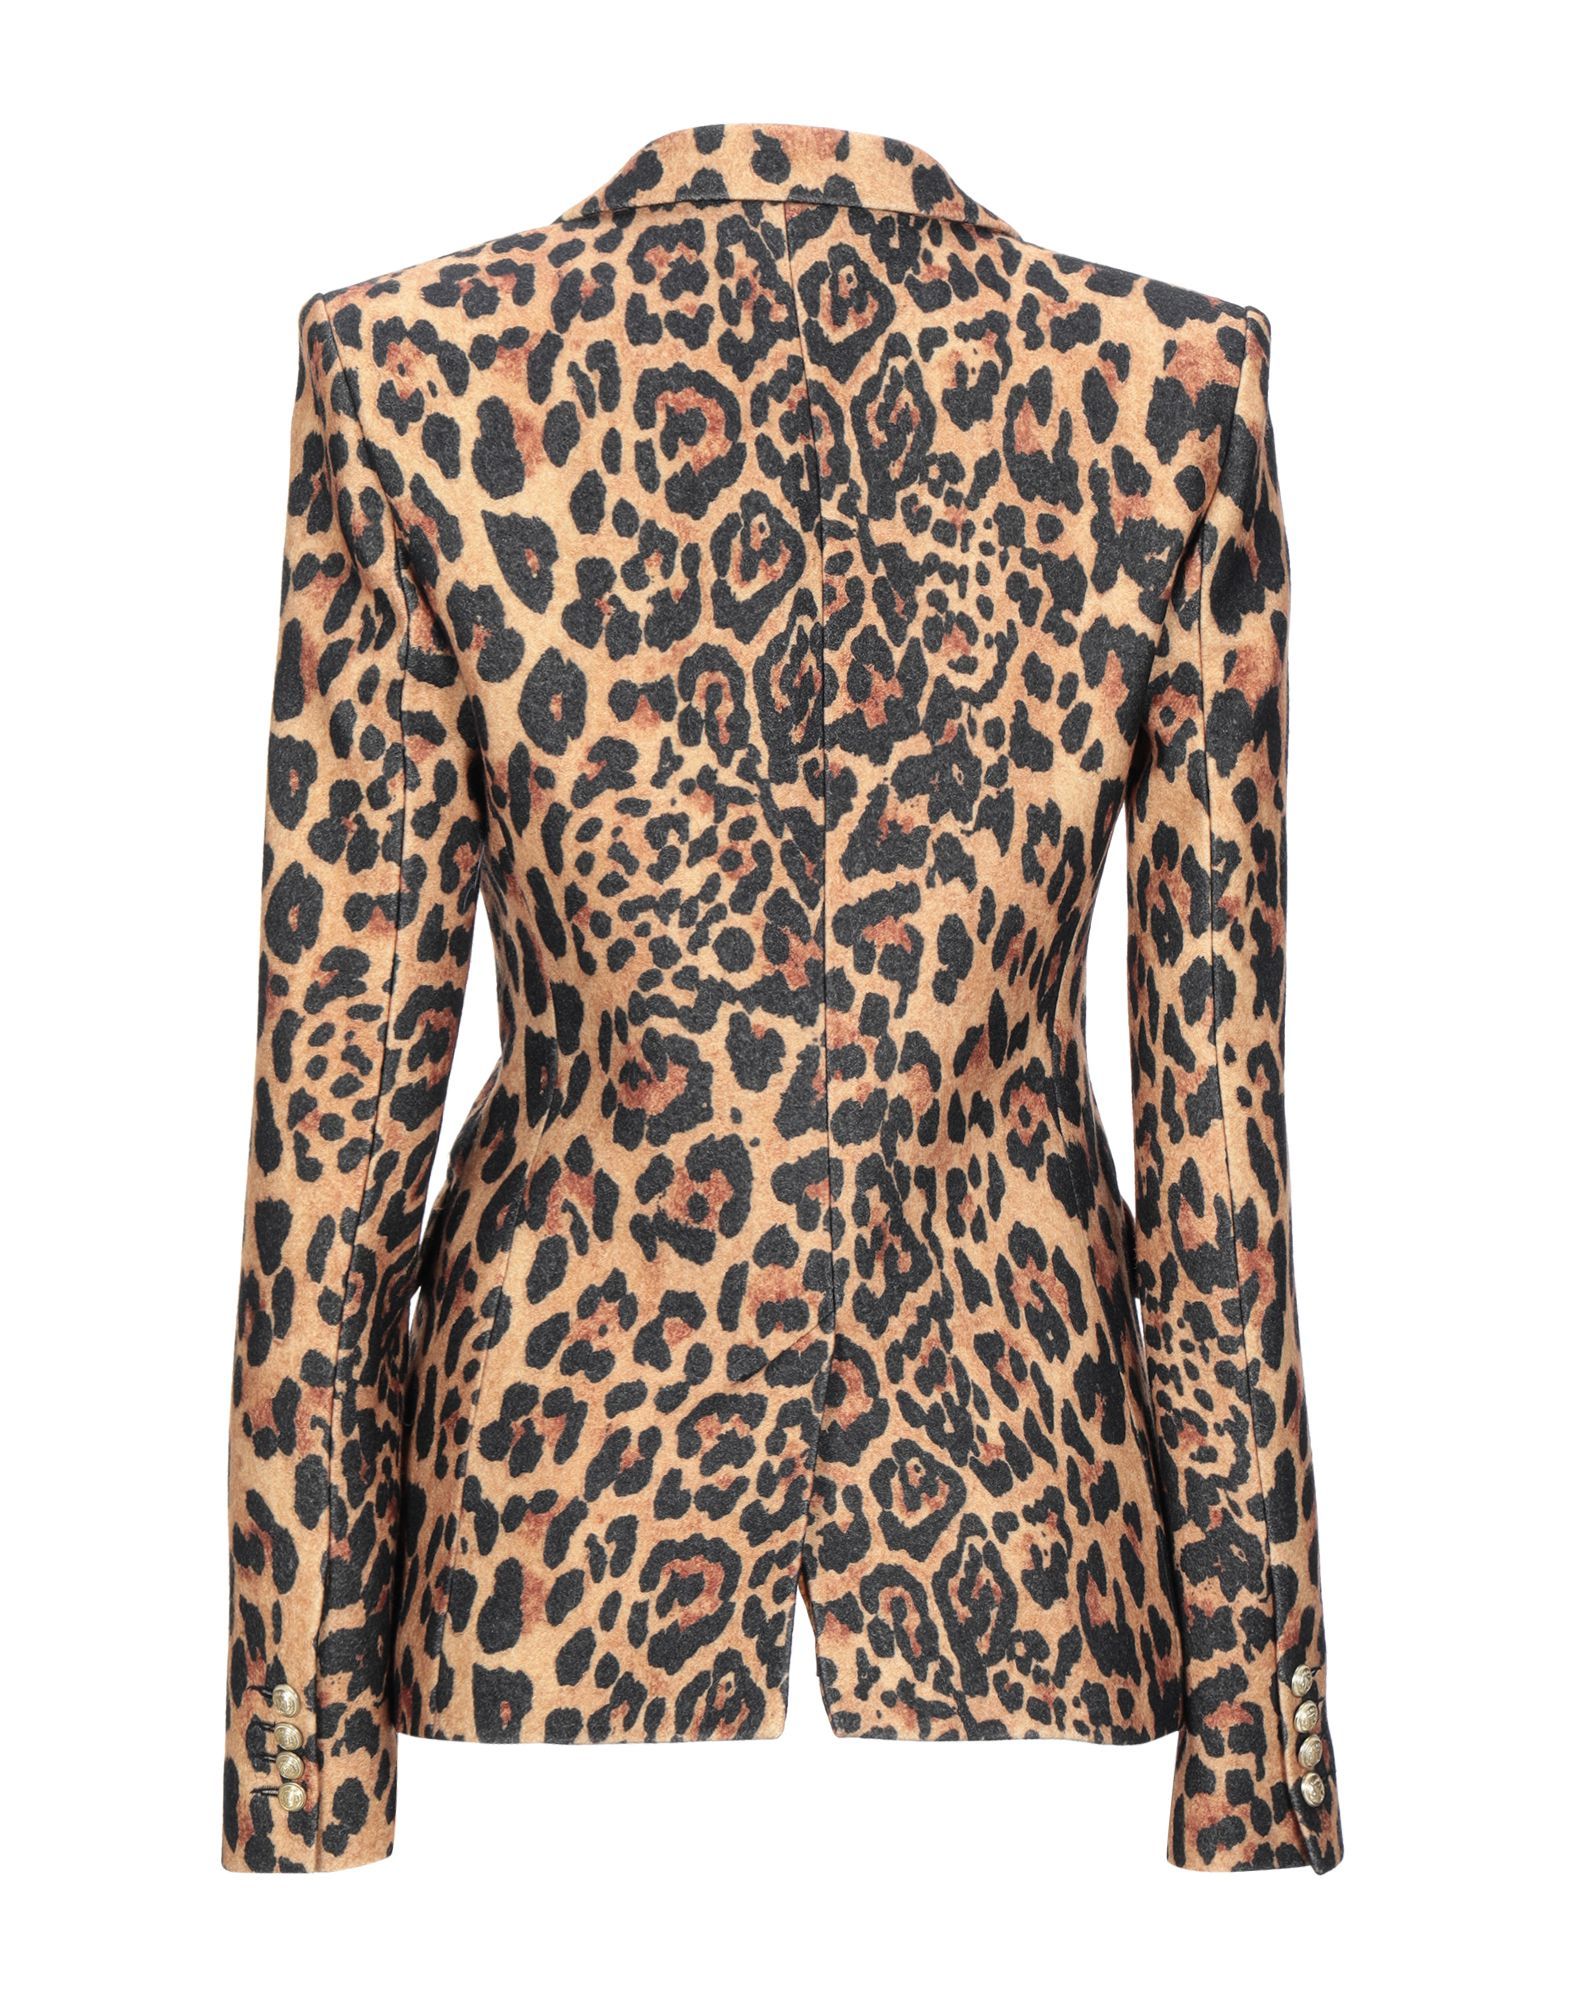 baize, no appliqués, leopard-print, multipockets, single chest pocket, two inside pockets, button closing, lapel collar, single-breasted , long sleeves, fully lined, back split